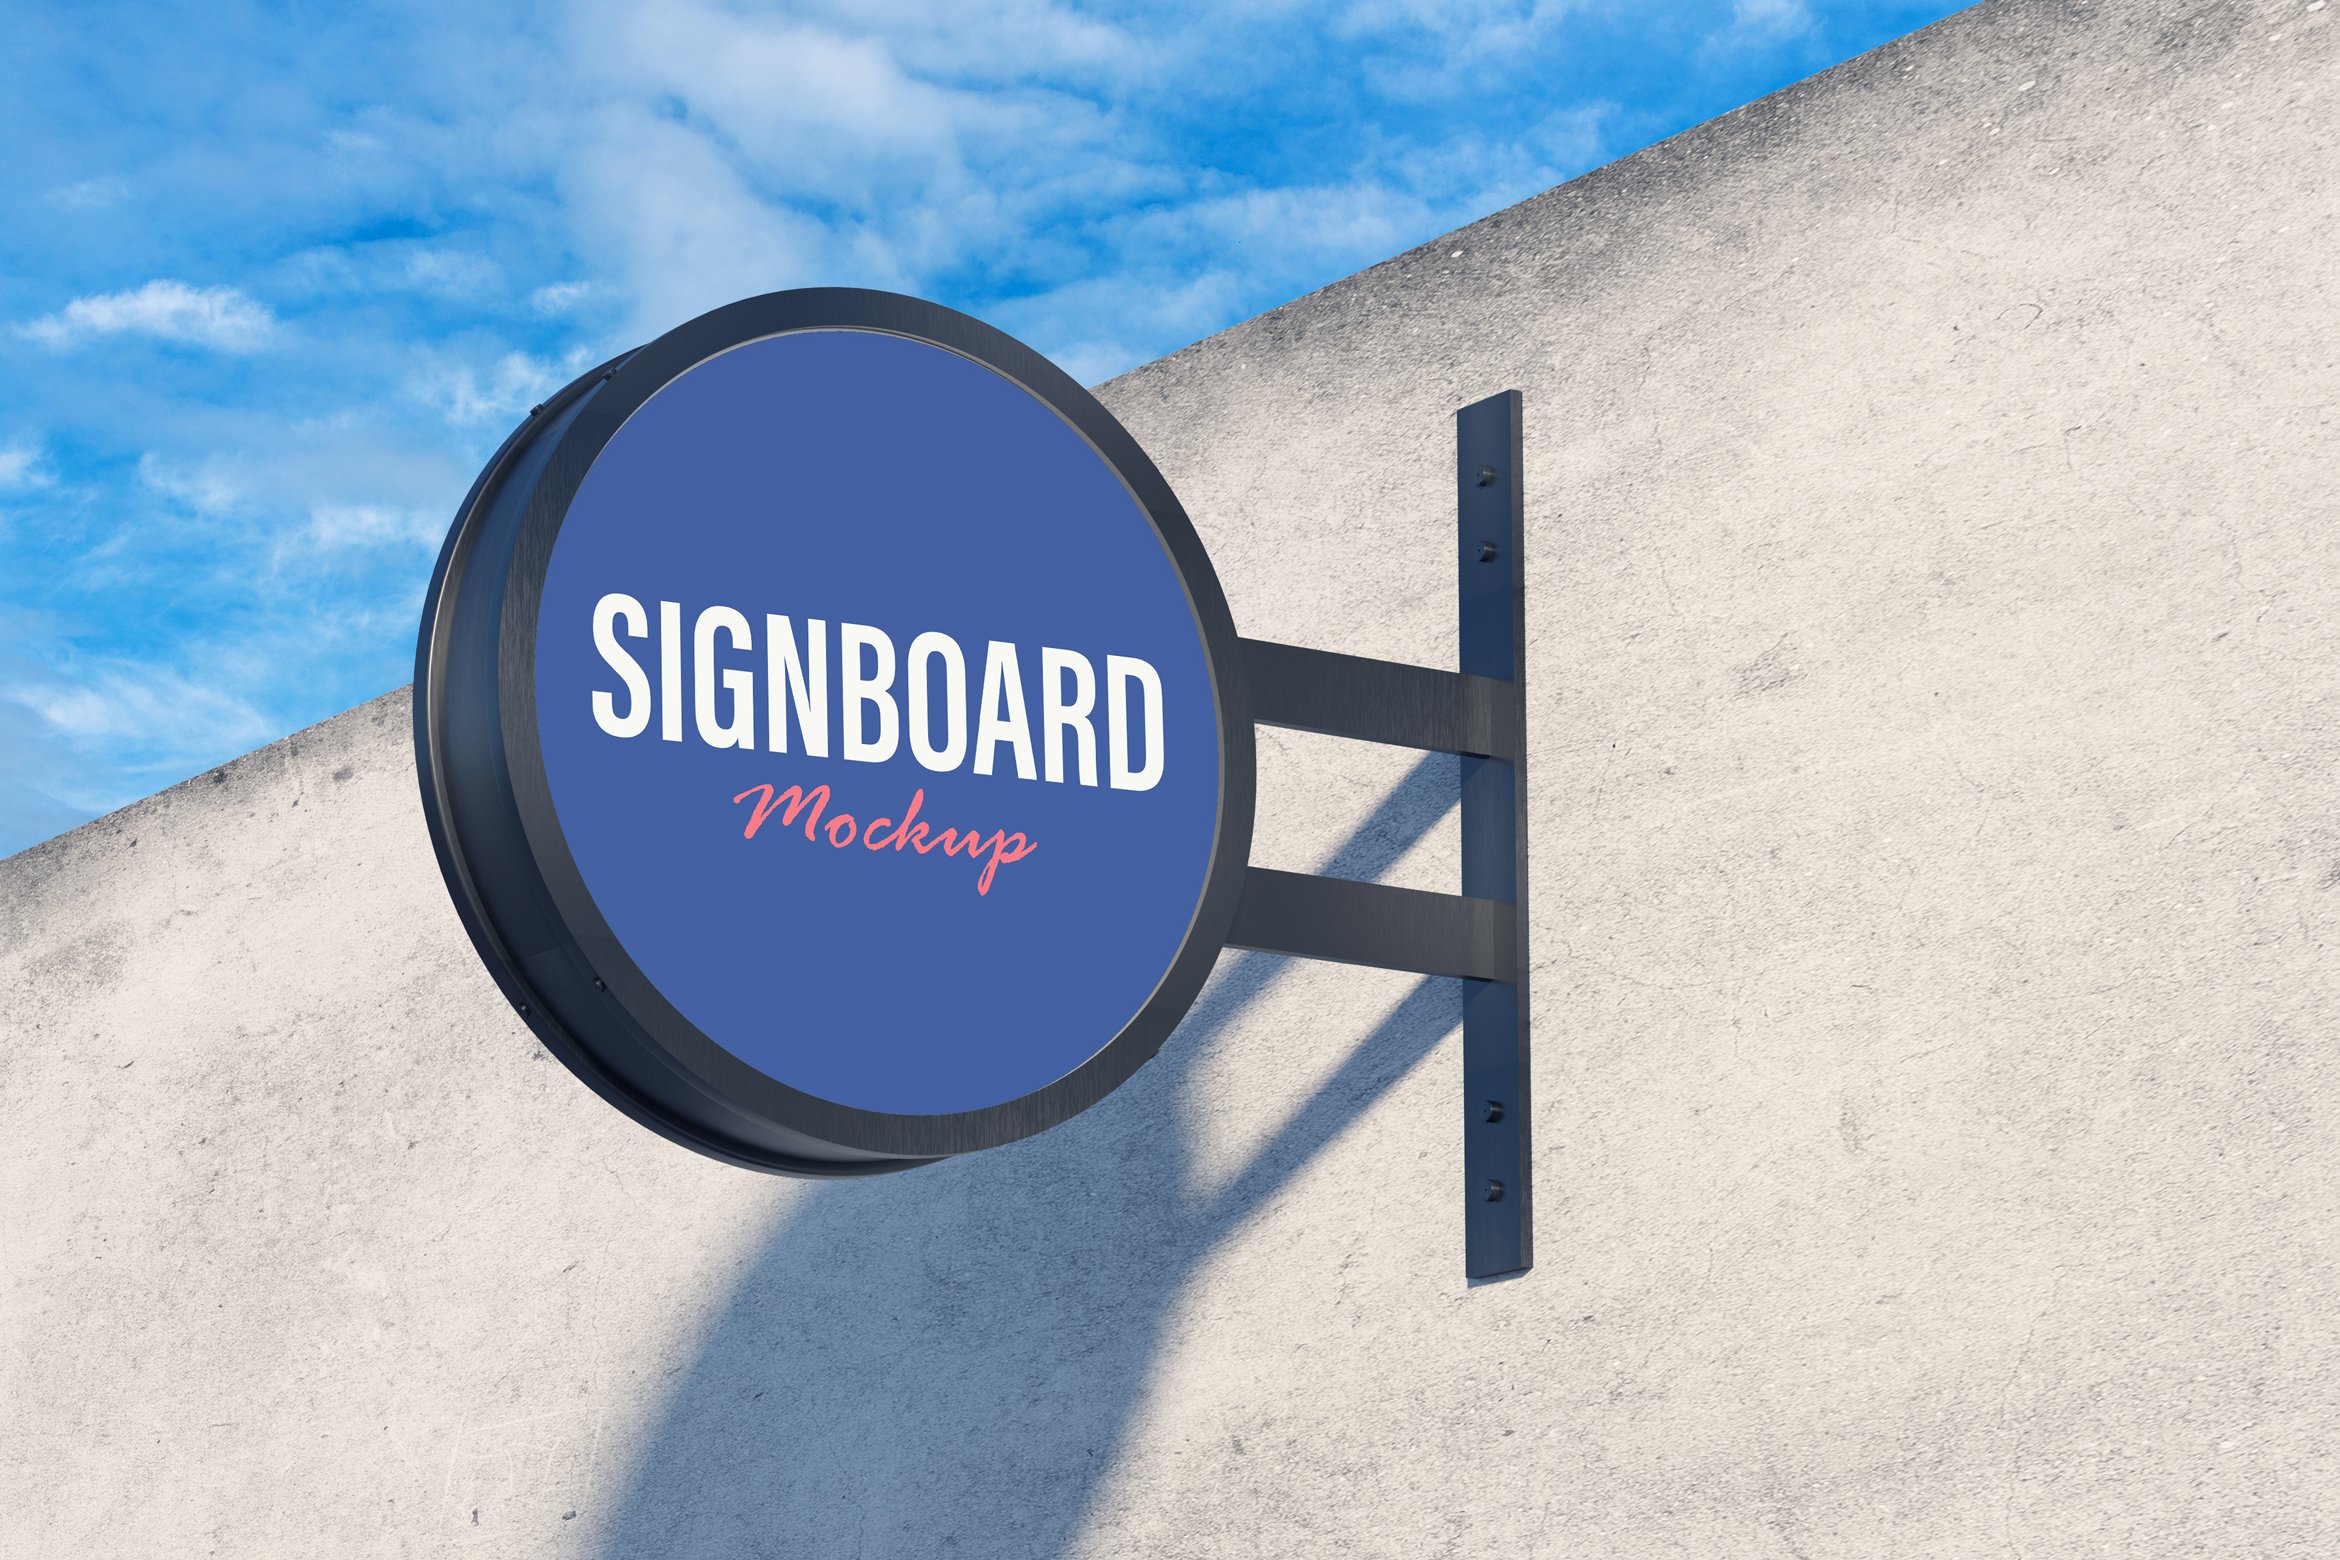 Round Signboard Mockup cover image.